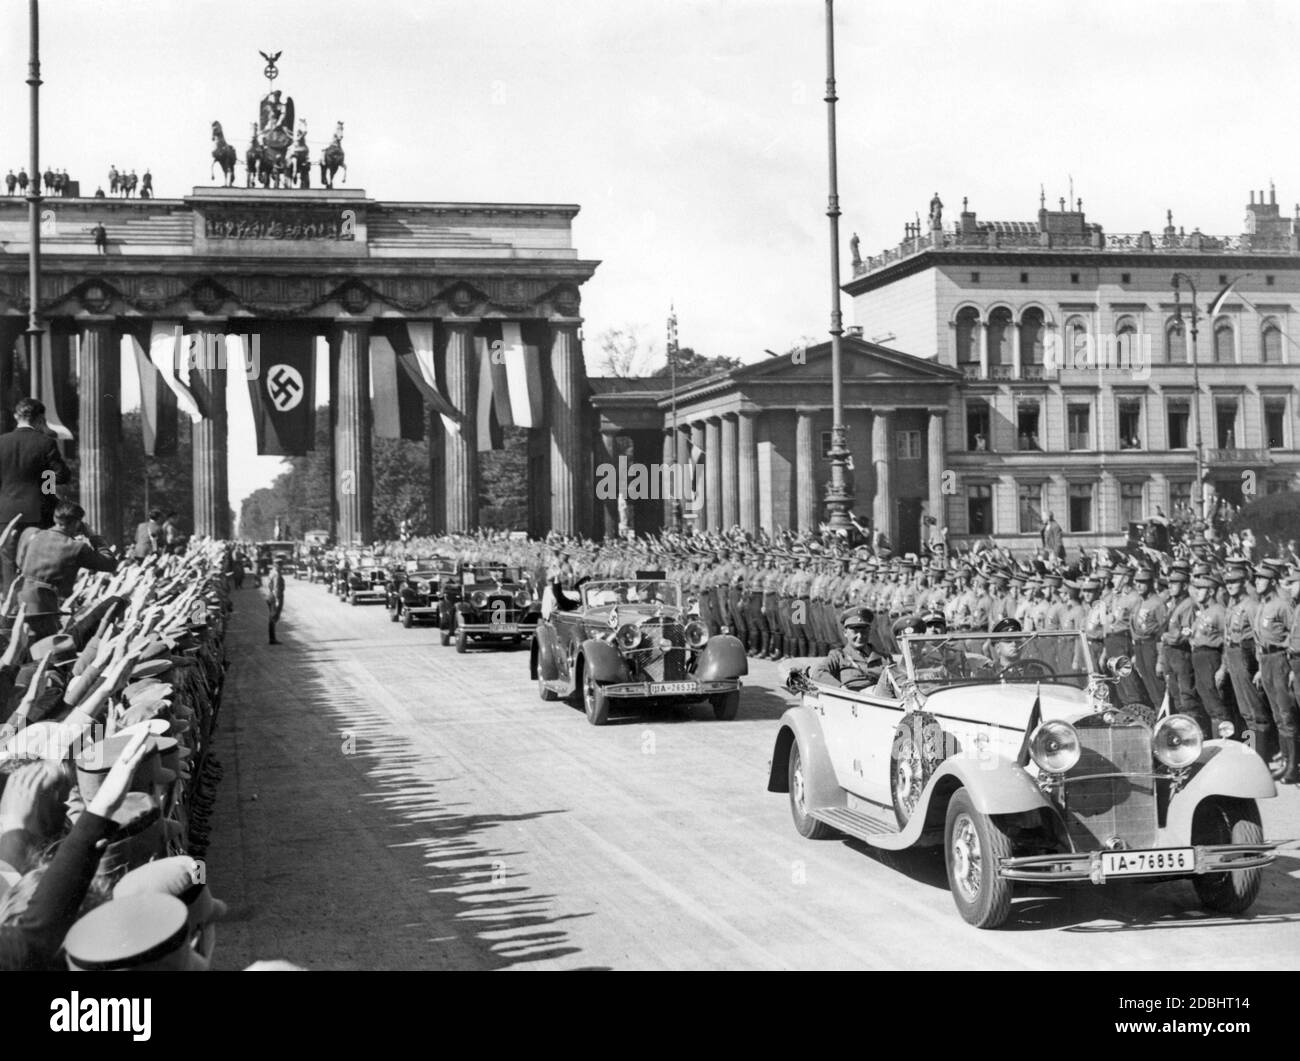 On September 15, 1933, the Prussian State Council was refounded as a purely advisory body of the National Socialists and met for its first session at the Humboldt University in Berlin. The photograph shows the entry of the Prussian state councillors through the Brandenburg Gate hung with swastika flag, cheered by a crowd of people showing the Hitler salute. In the first car, a Mercedes-Benz W10 (type Mannheim 370) with Berlin license plates, sits the Prussian Minister President Hermann Goering (2nd row left) and SA Chief of Staff Ernst Roehm (right). Behind them is a Mercedes-Benz W22 (type Stock Photo